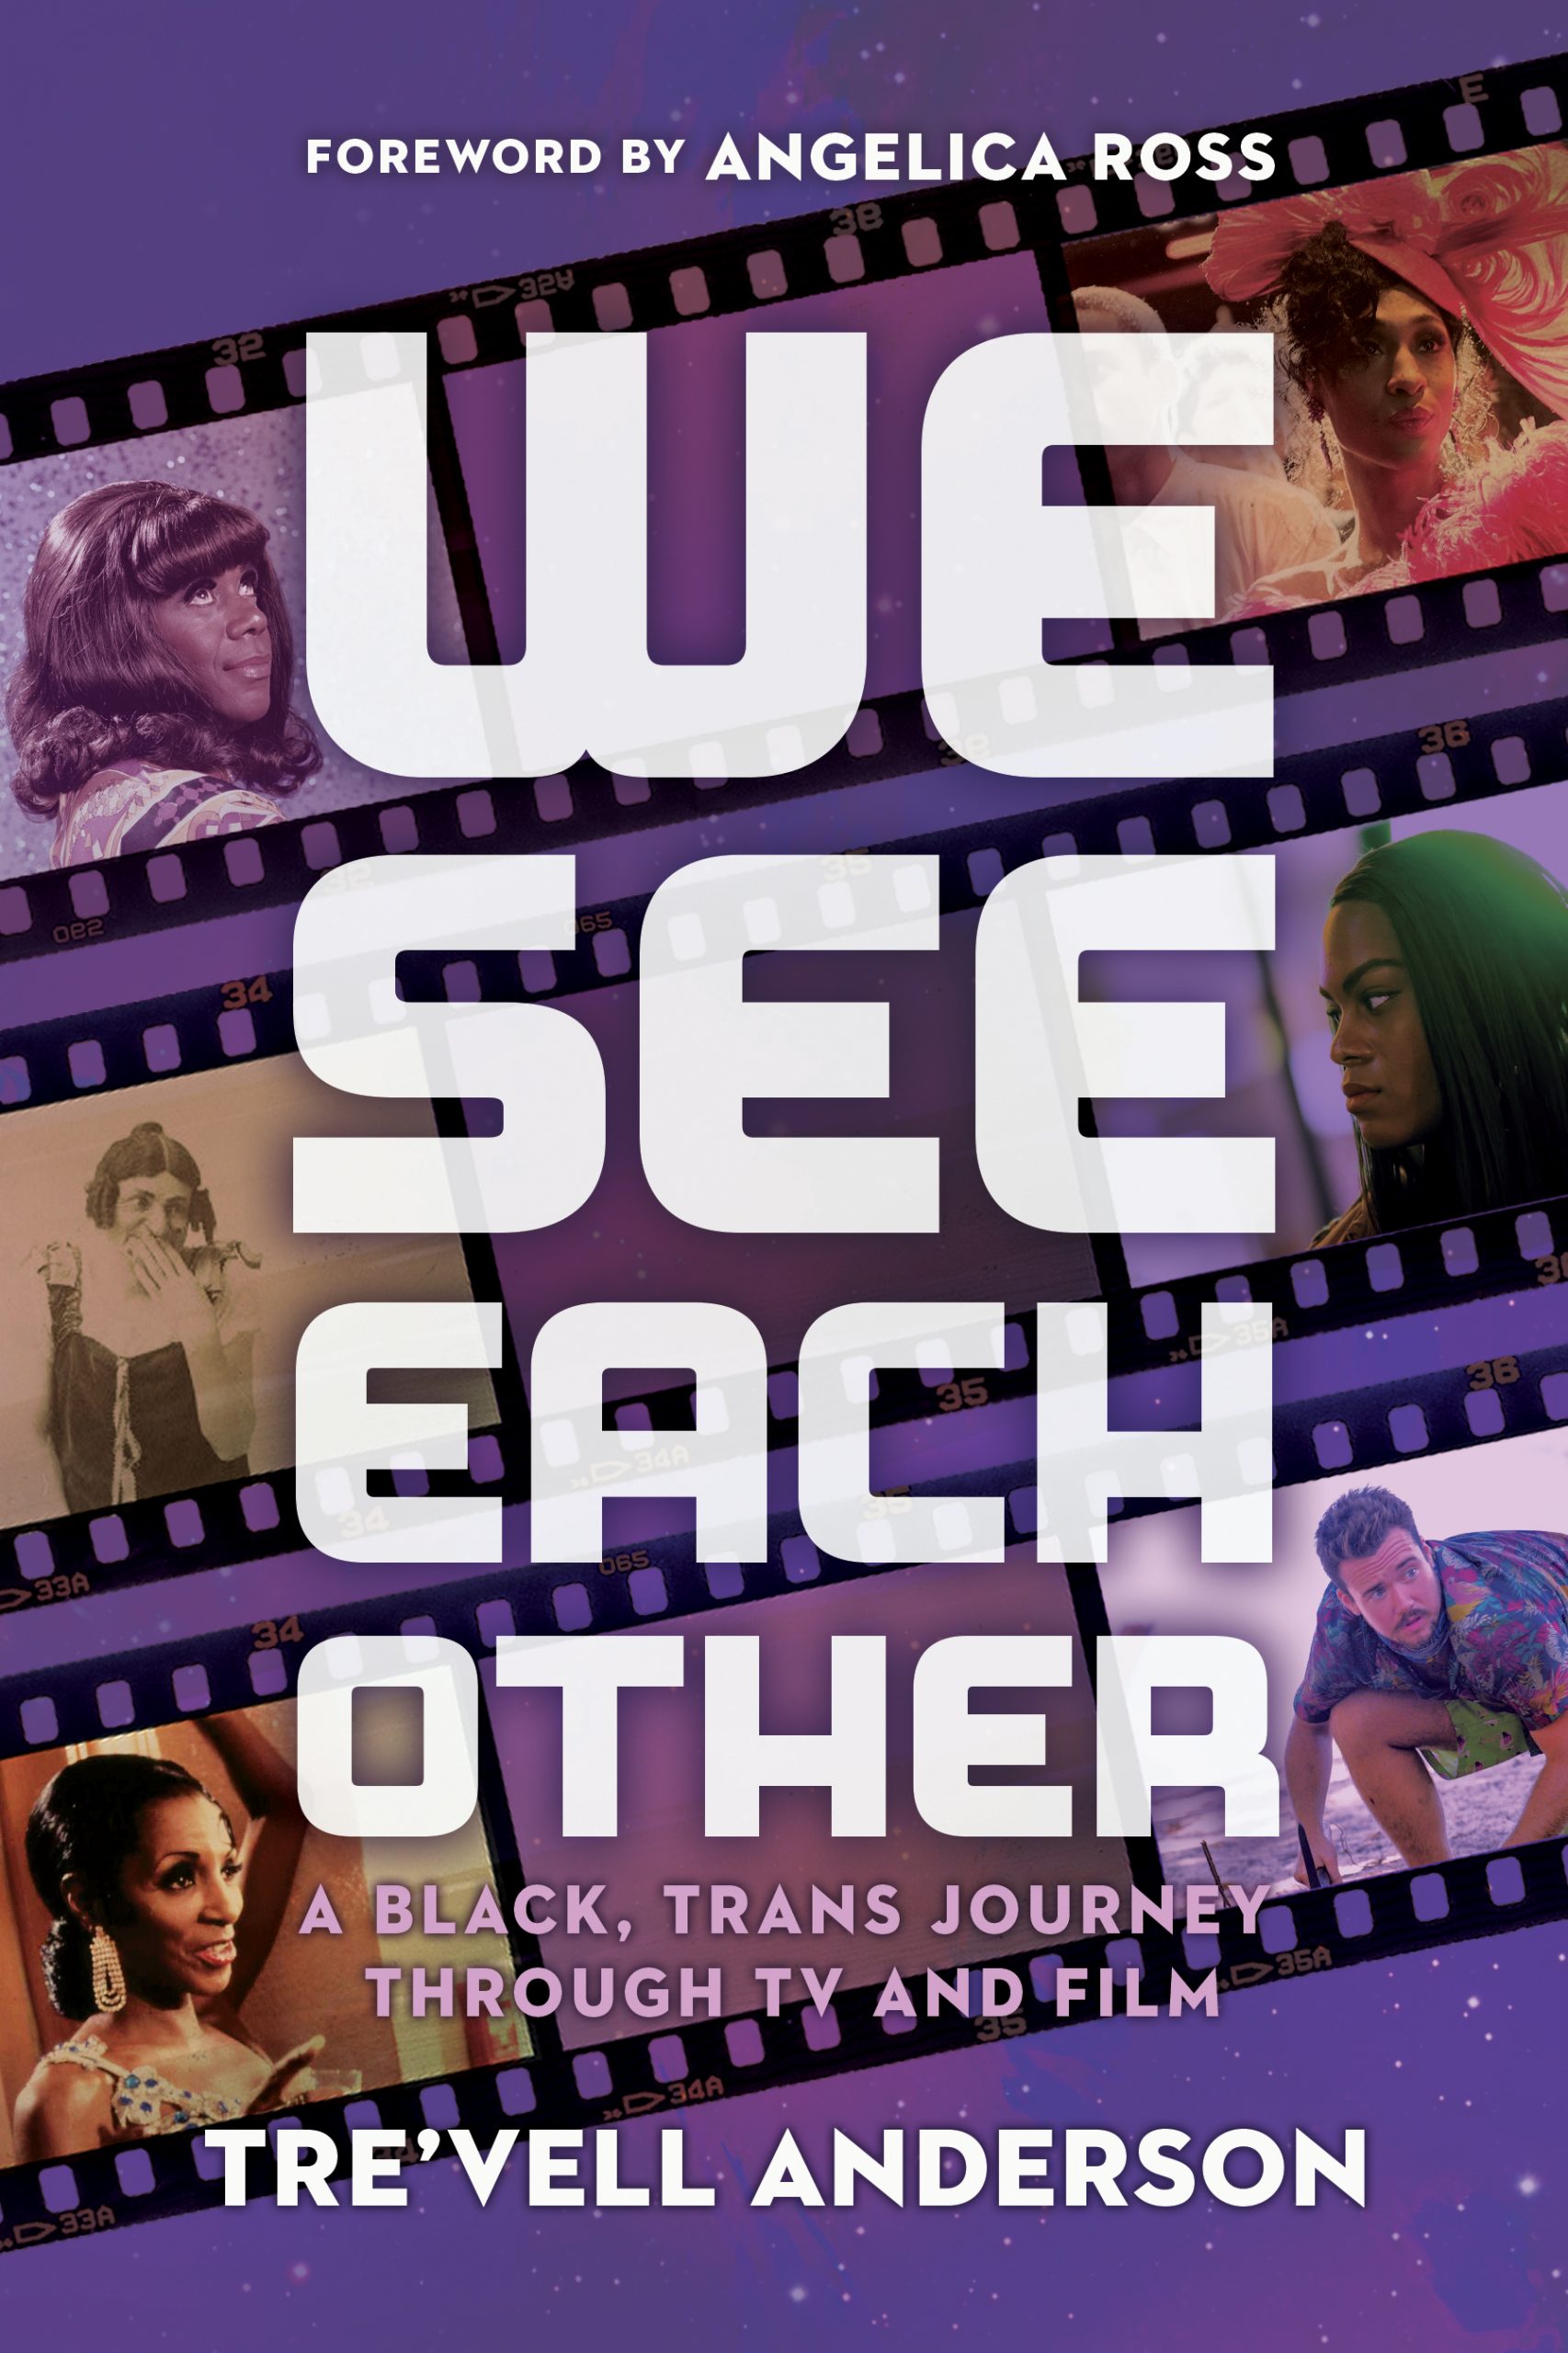 We See Each Other A Black, Trans Journey Through TV and Film by Trevell Anderson